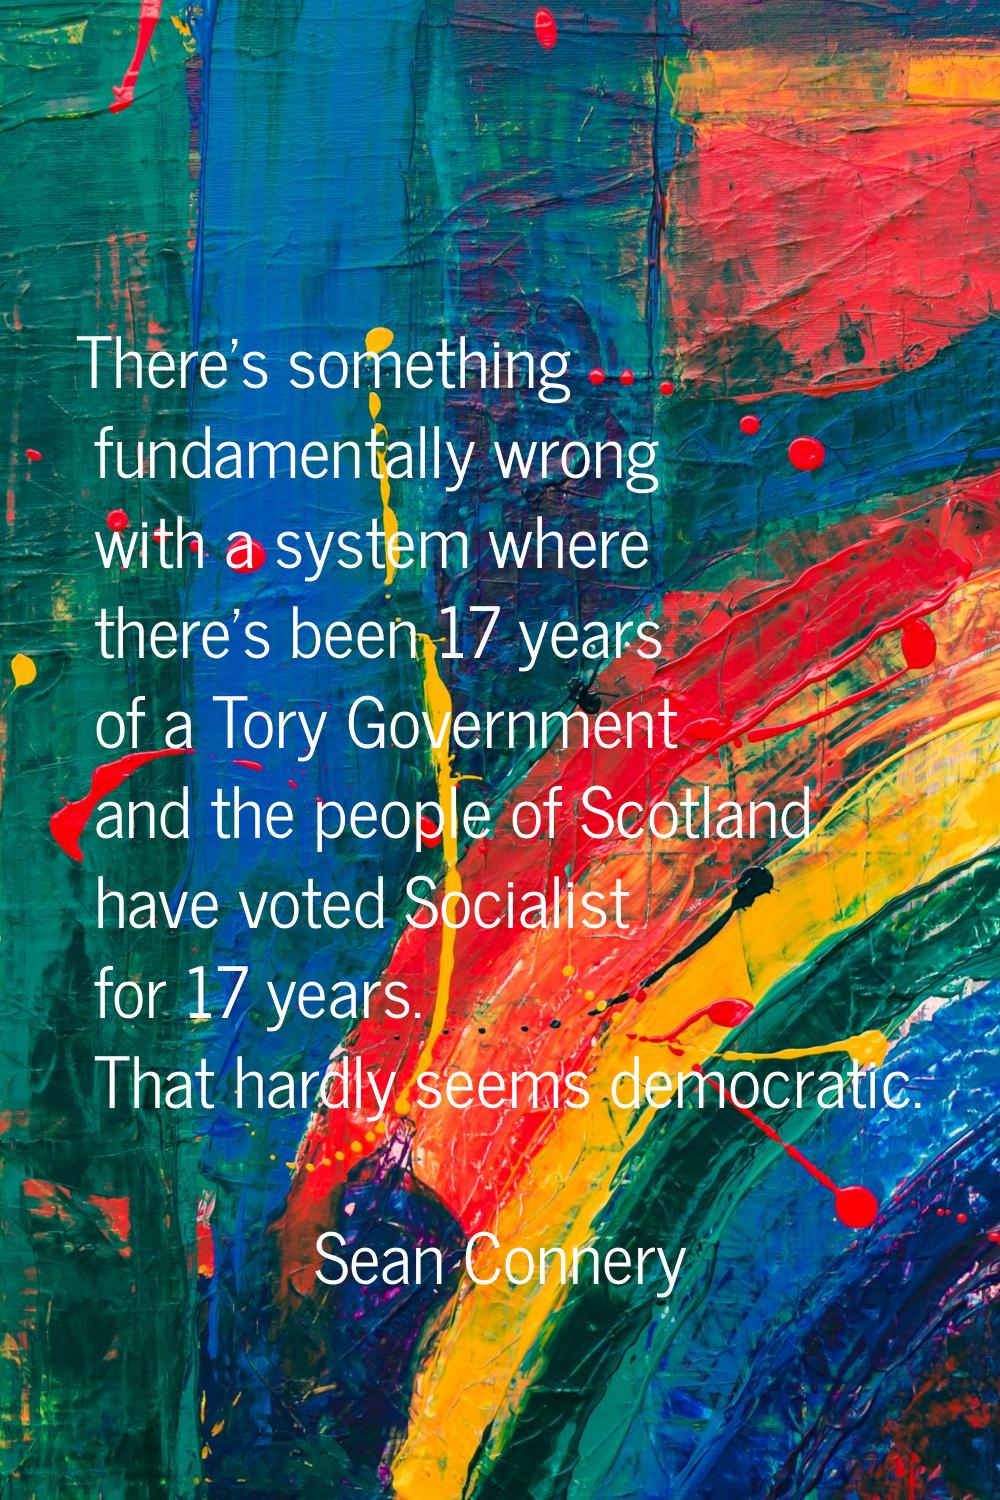 There's something fundamentally wrong with a system where there's been 17 years of a Tory Governmen